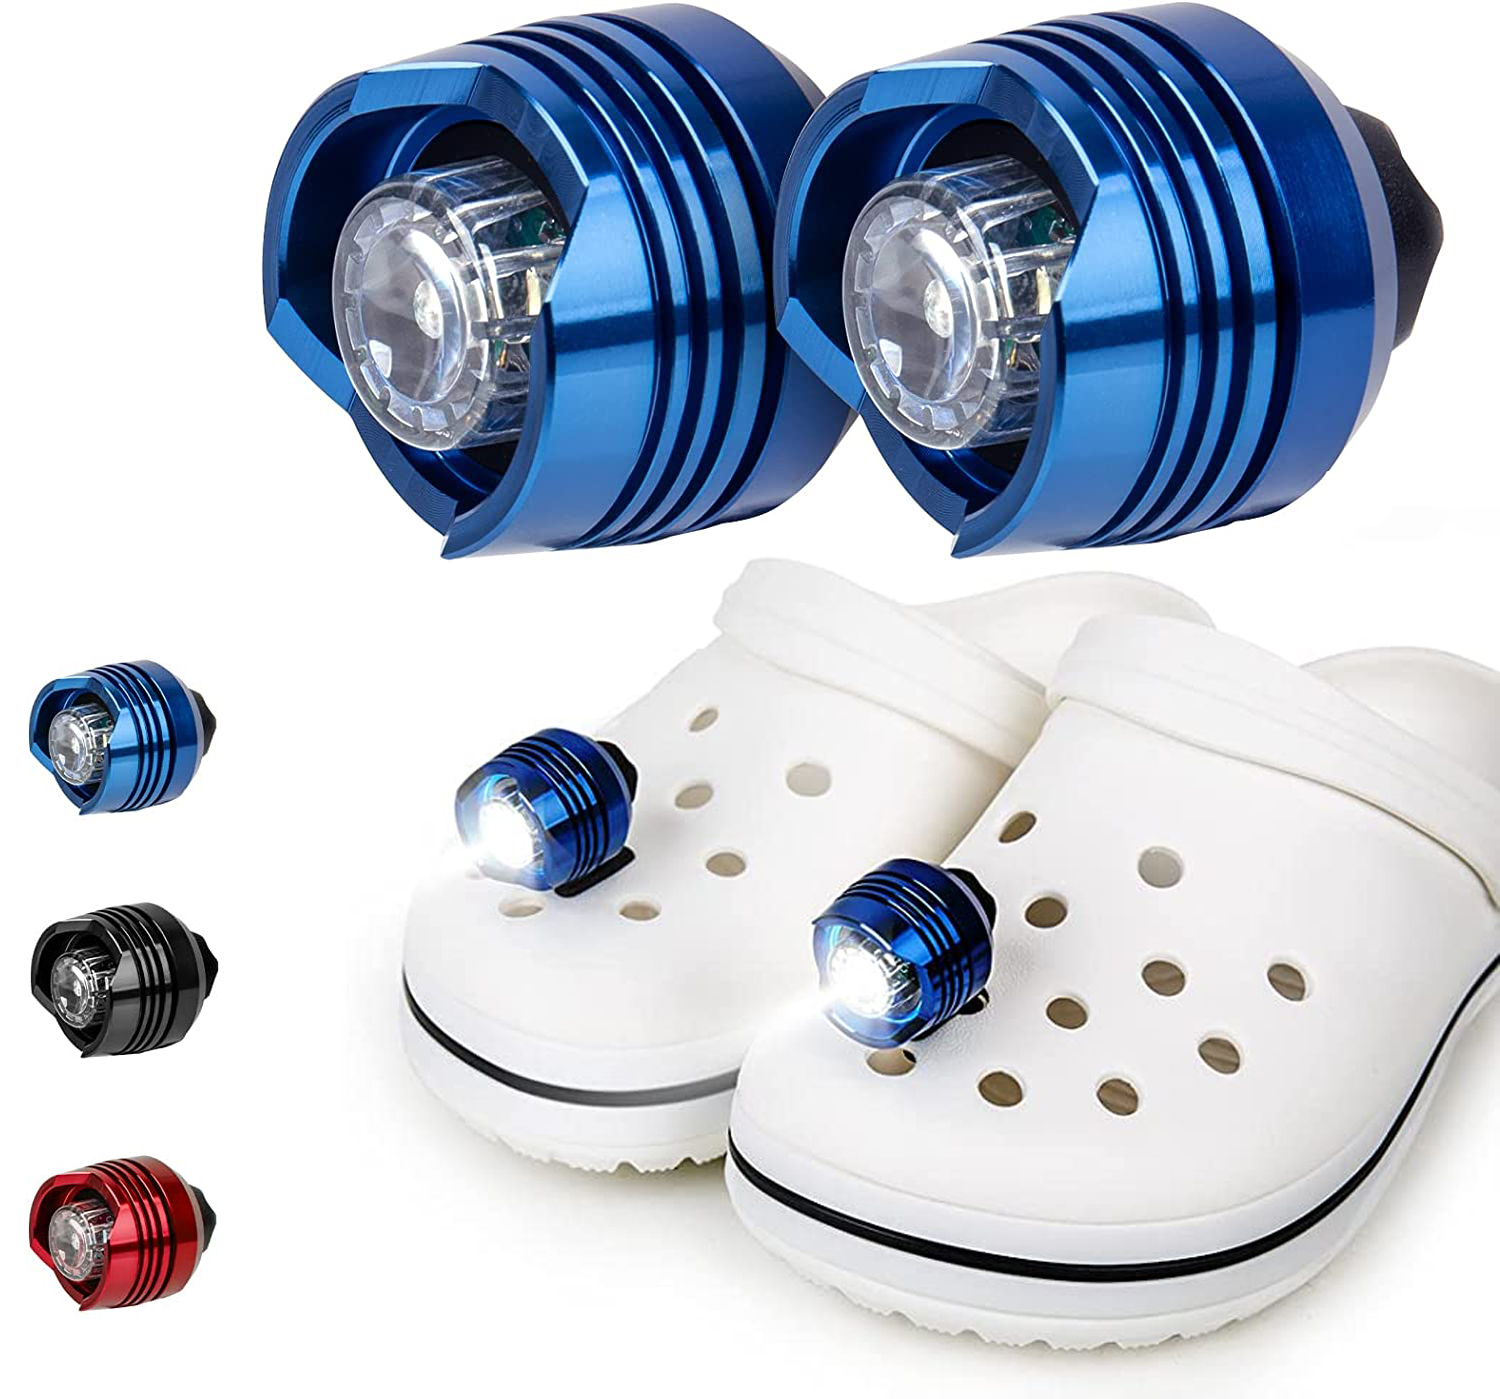 Flashlights Attachment for Shoes - Light Up Charms Accessories